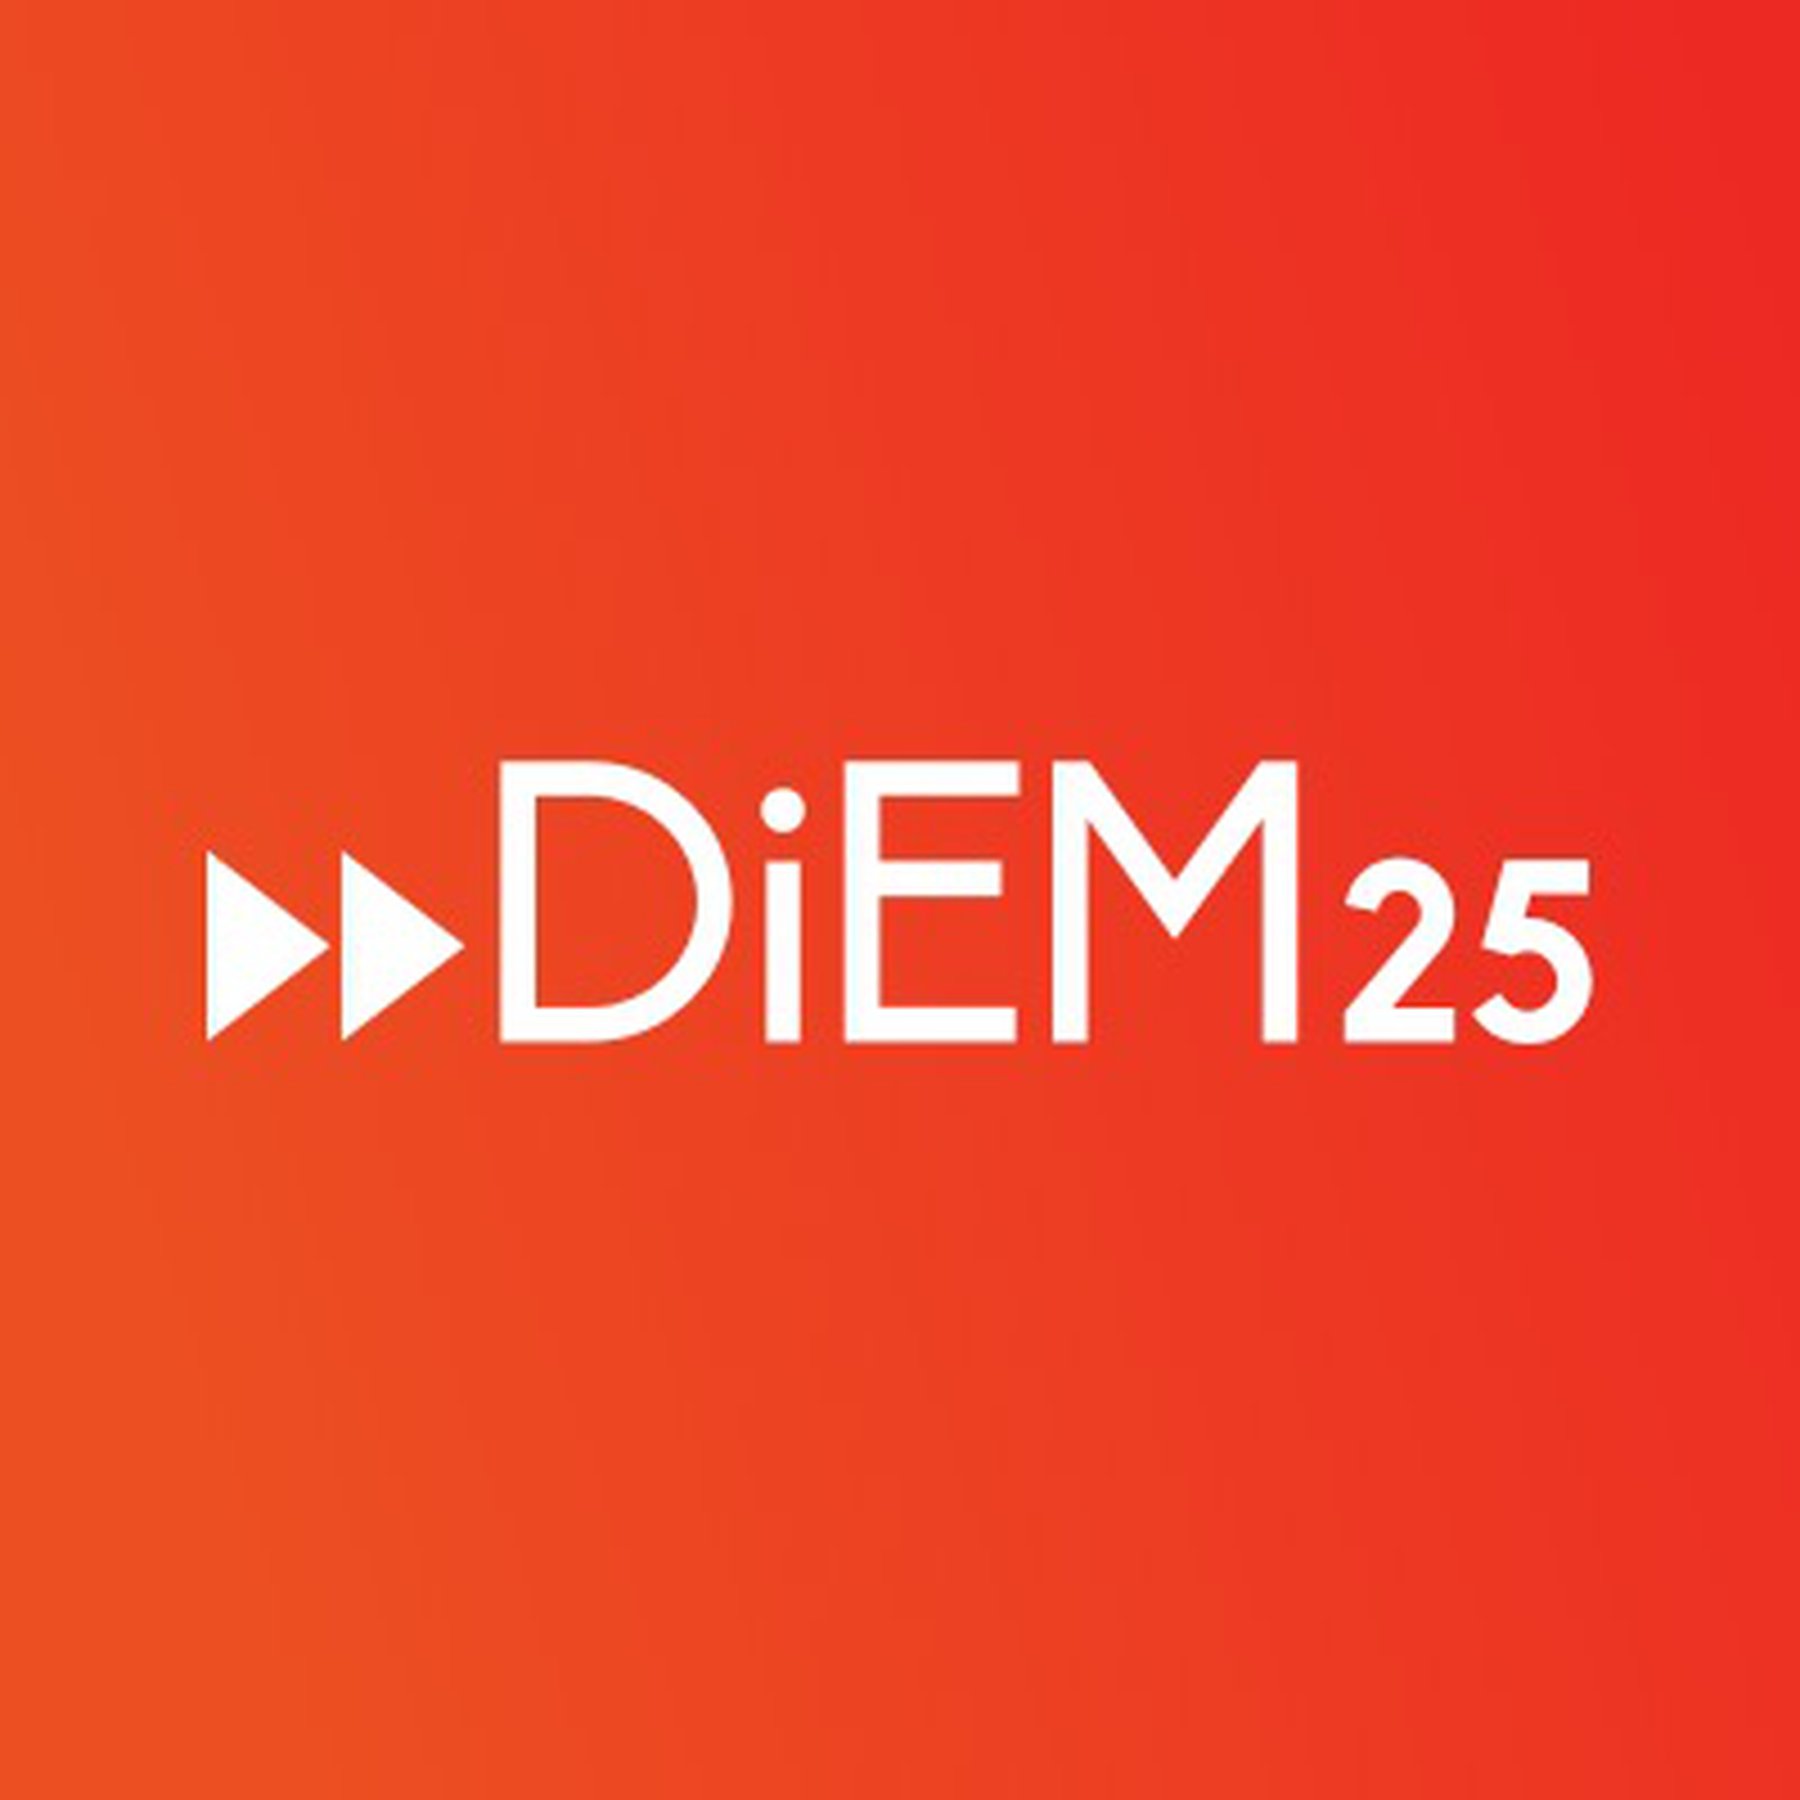 DiEM25 - The Time of Courage